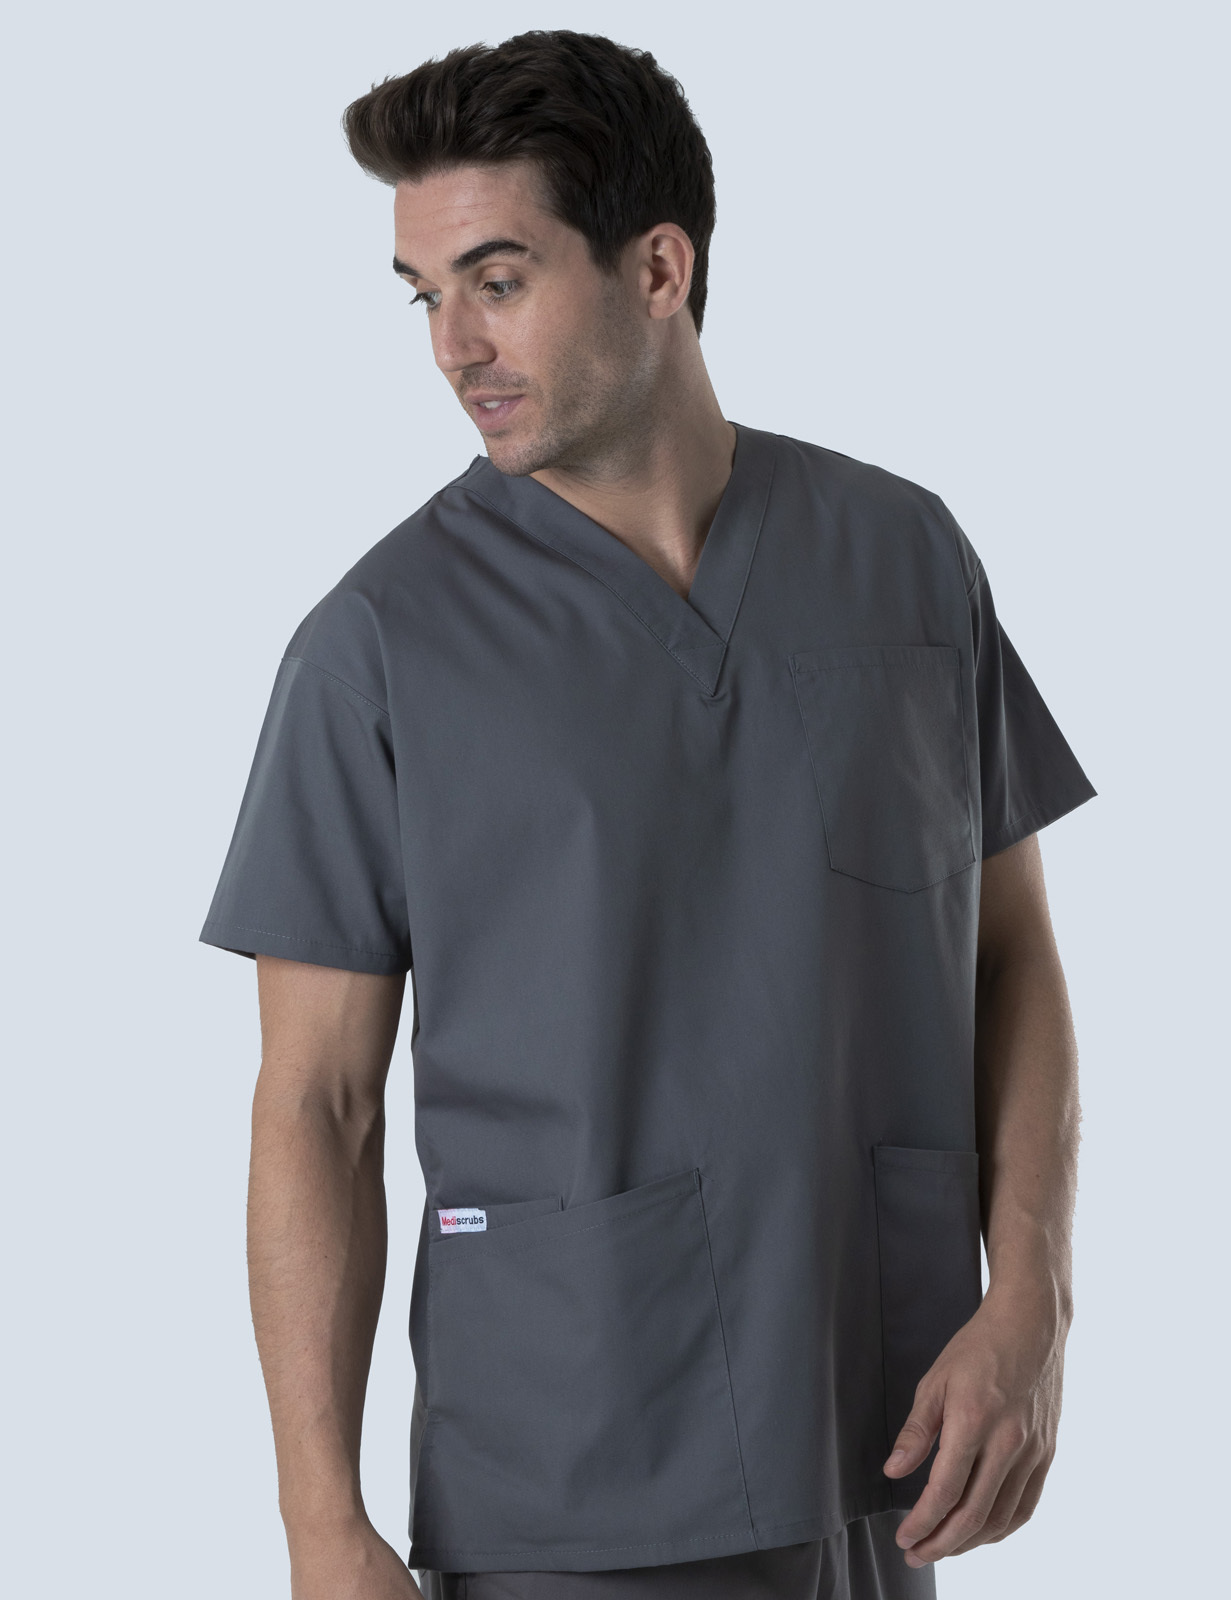 Ipswich - ED NMP CNC (4 Pocket Scrub Top and Cargo Pants in Steel Grey incl Logos)